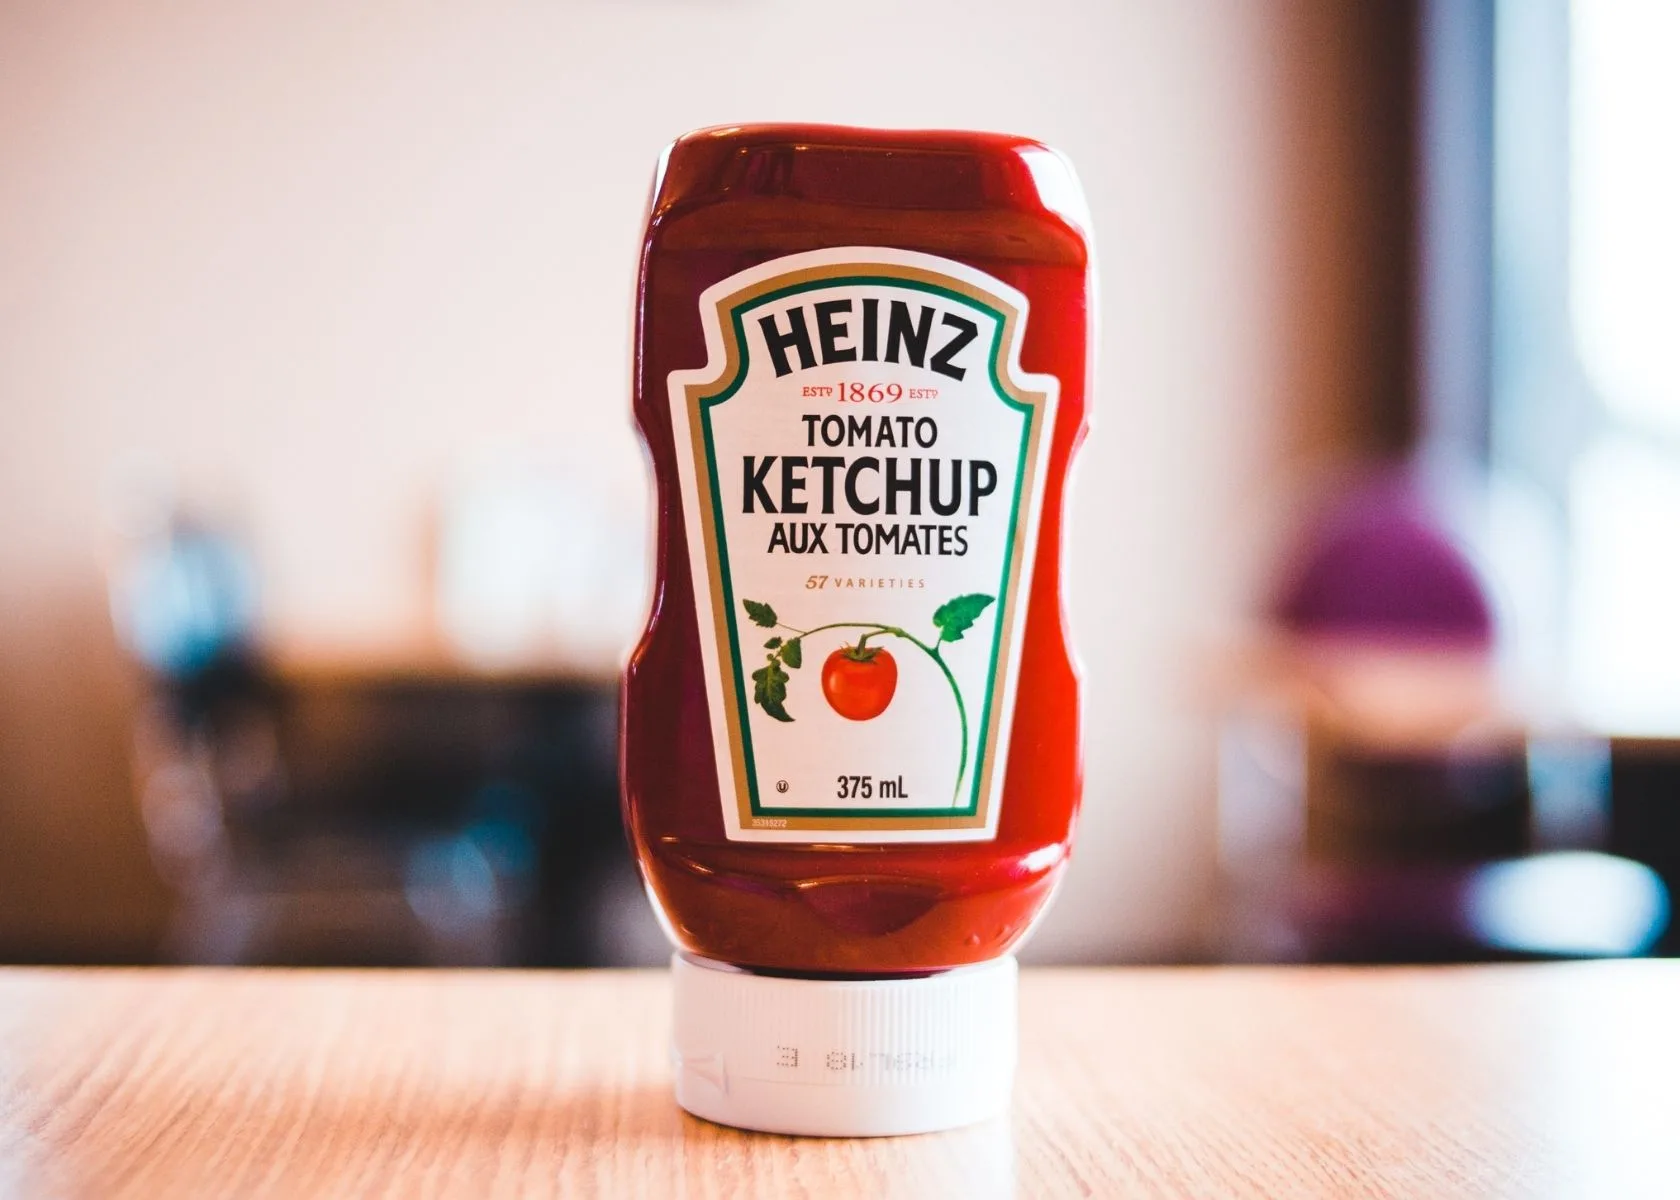 Heinz ketchup bottle on wood table in a restaurant.